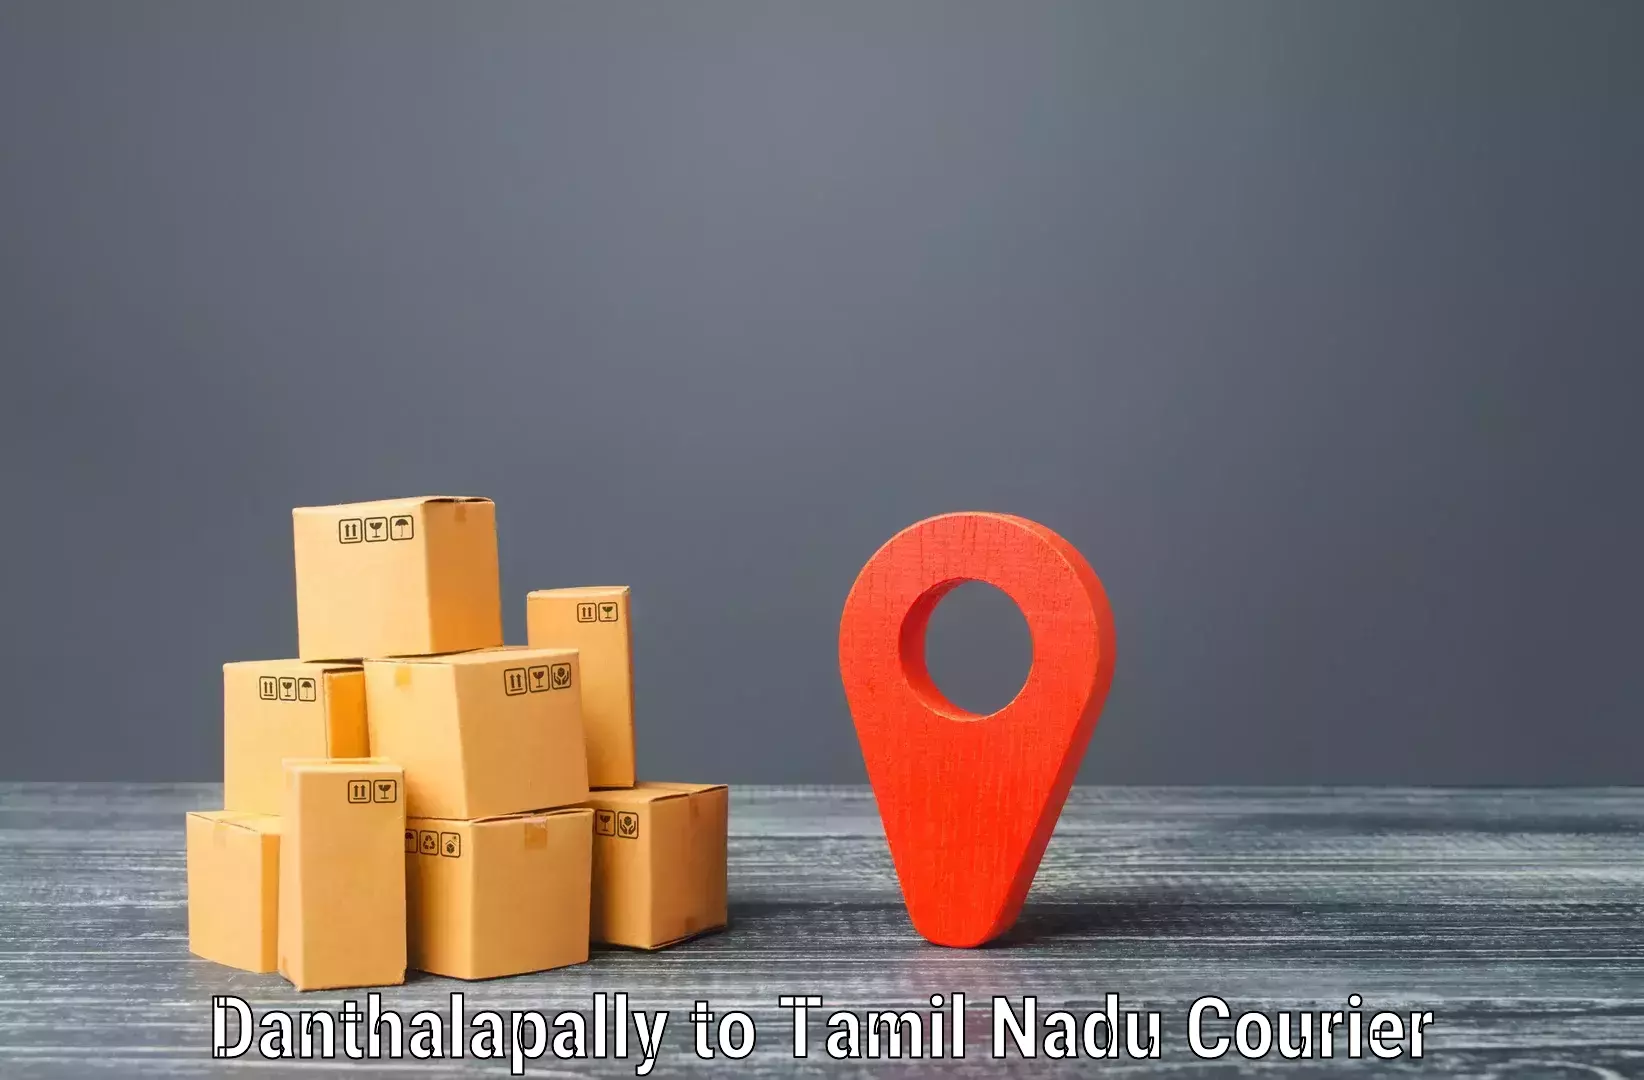 Quality courier services Danthalapally to Trichy